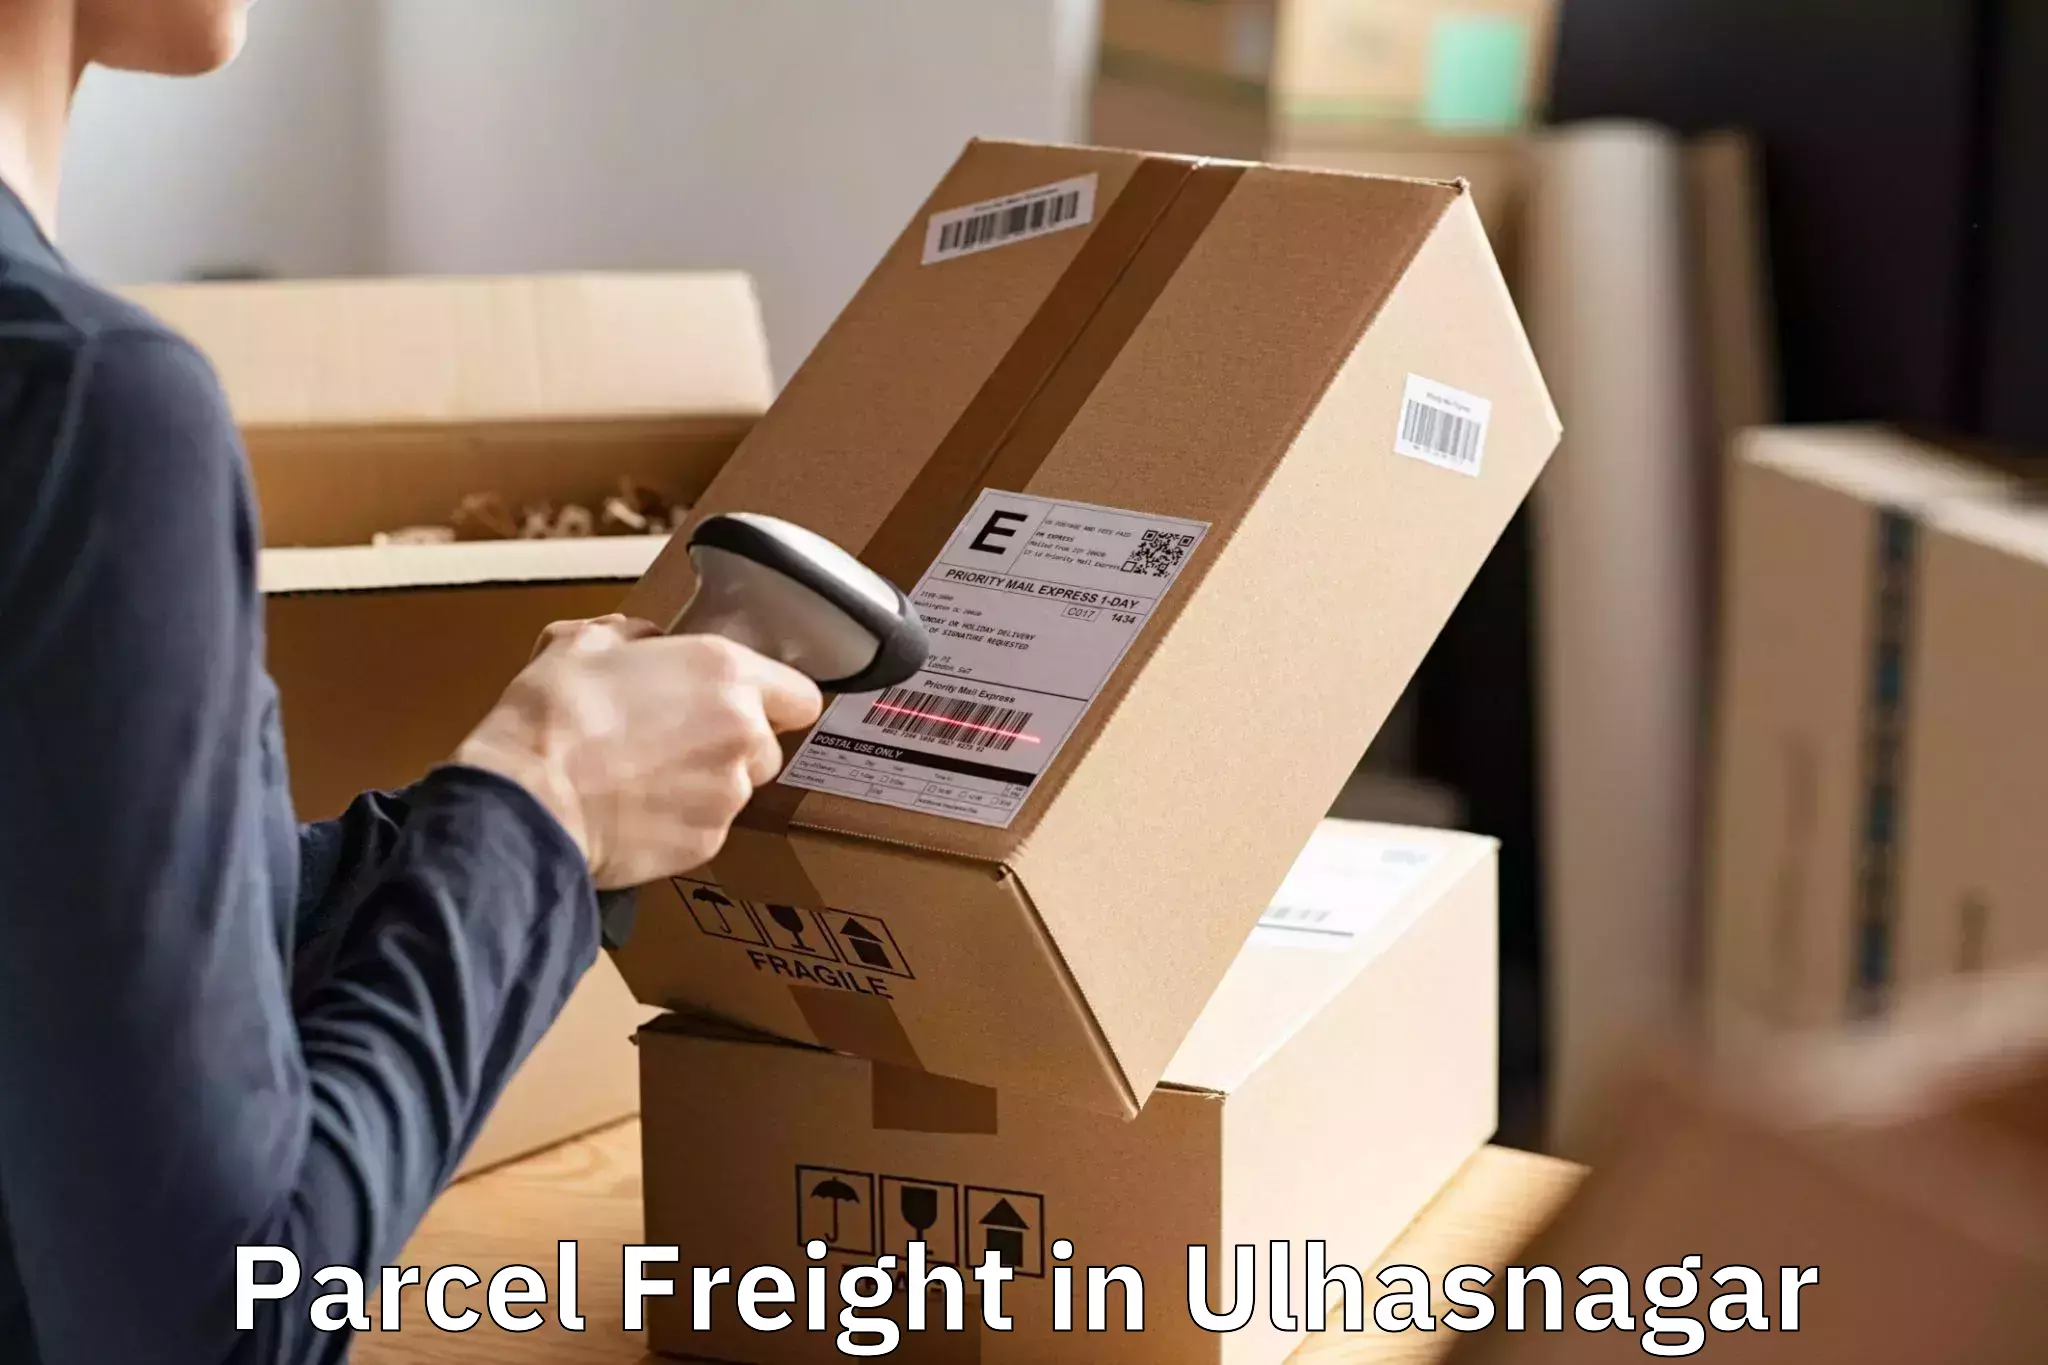 Top Parcel Freight Available in Ulhasnagar, Maharashtra (MH)